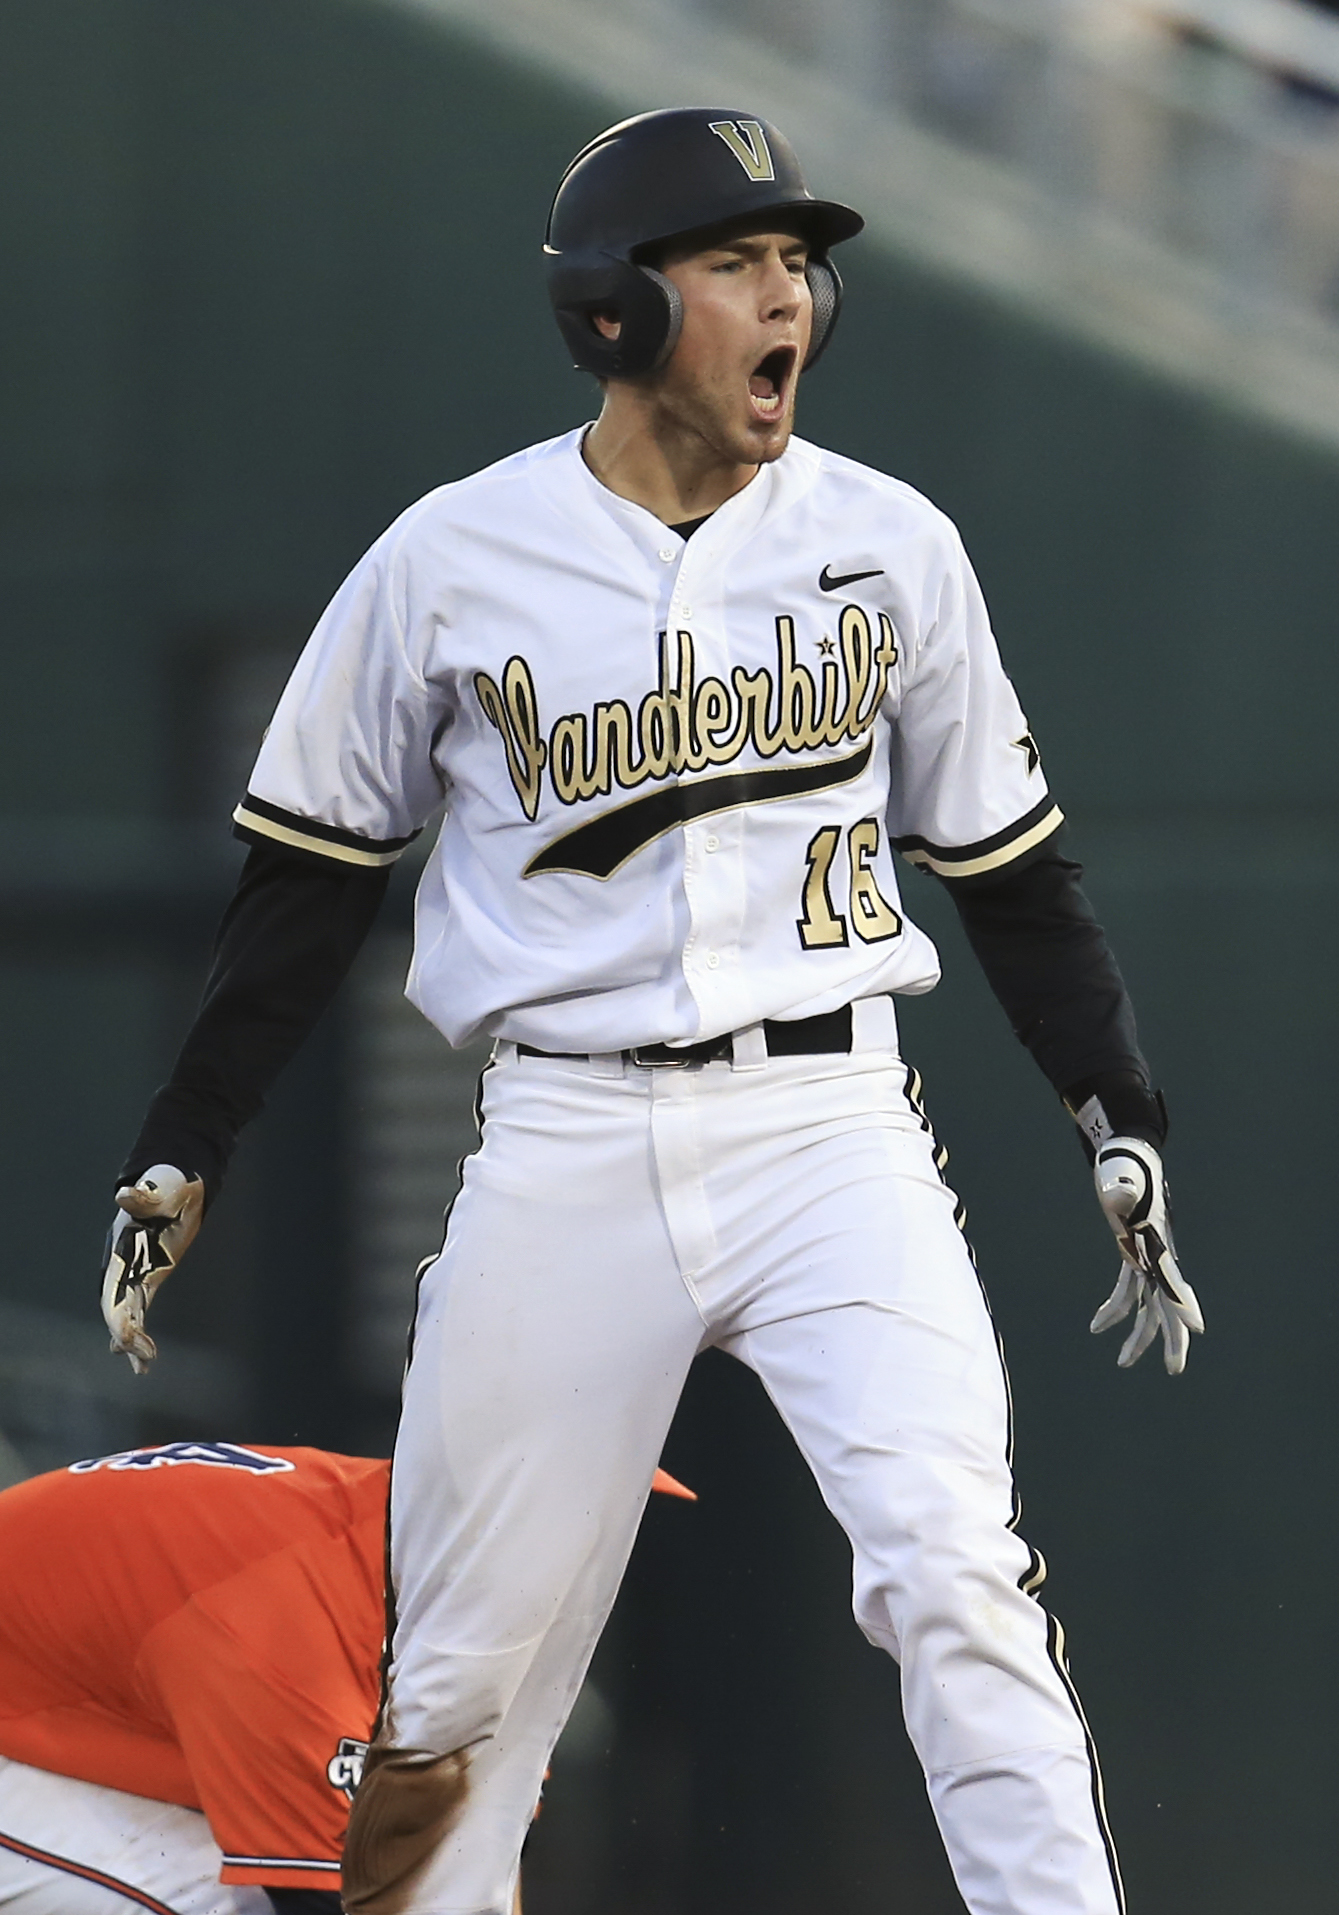 Penn Murfee, screaming, "I should have been the DH or 2nd baseman all year!!!" with his body language.